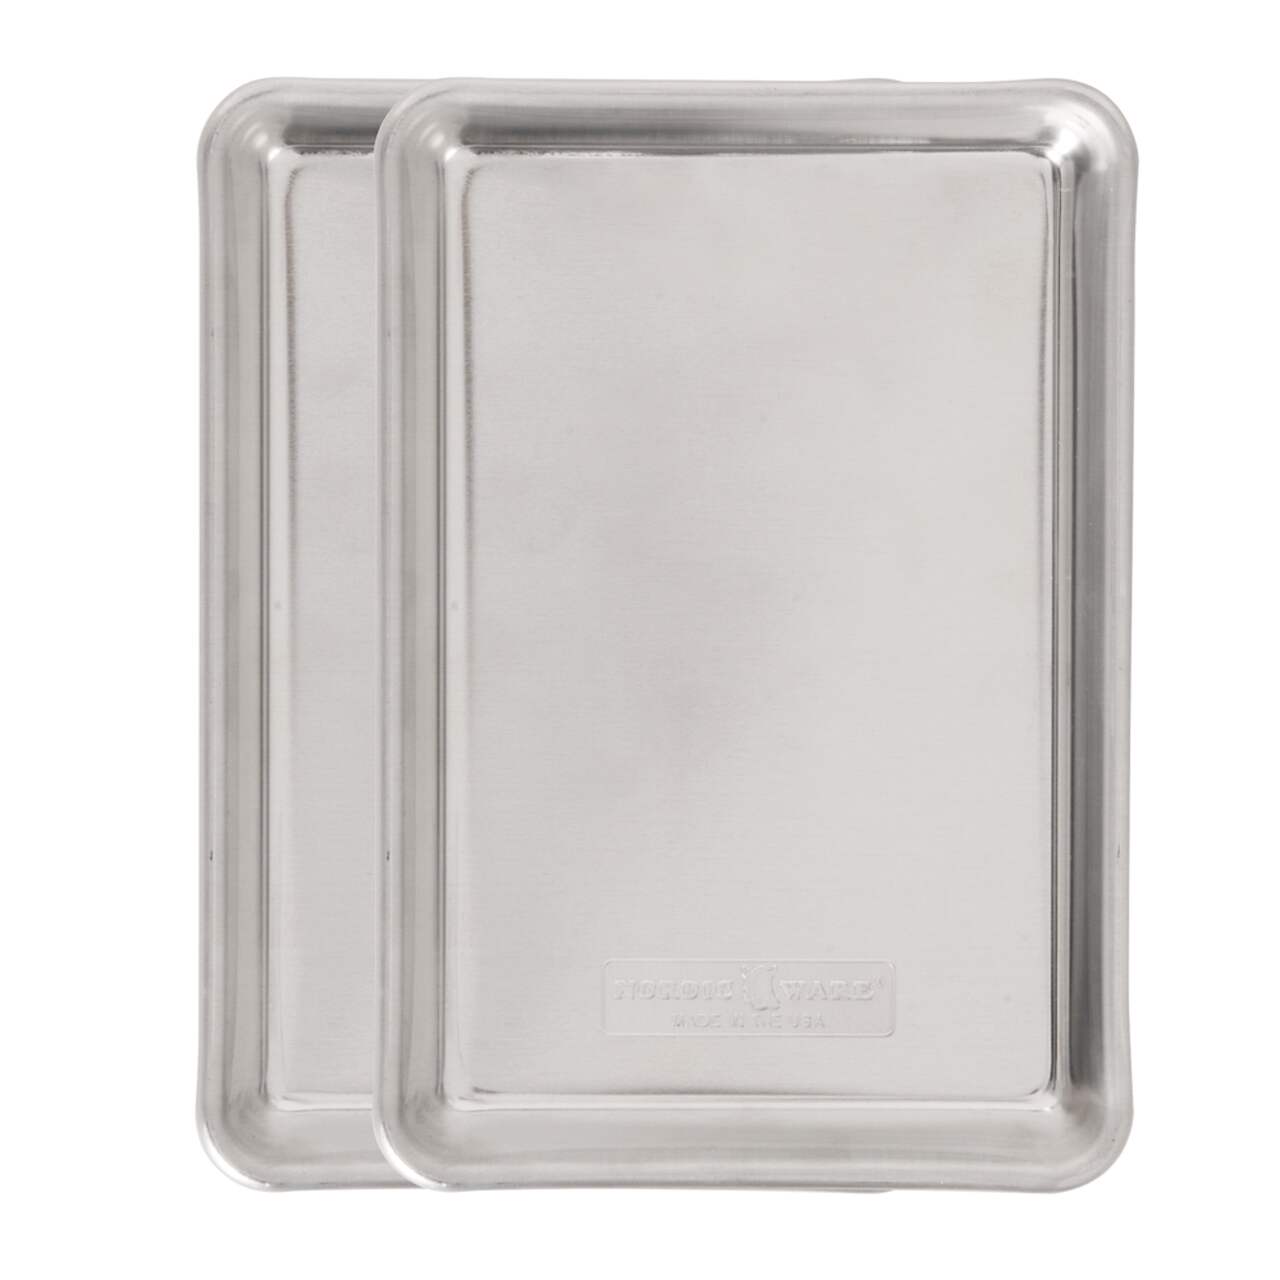 Nordicware Naturals Uncoated Aluminum Eighth Sheet, 2-pc